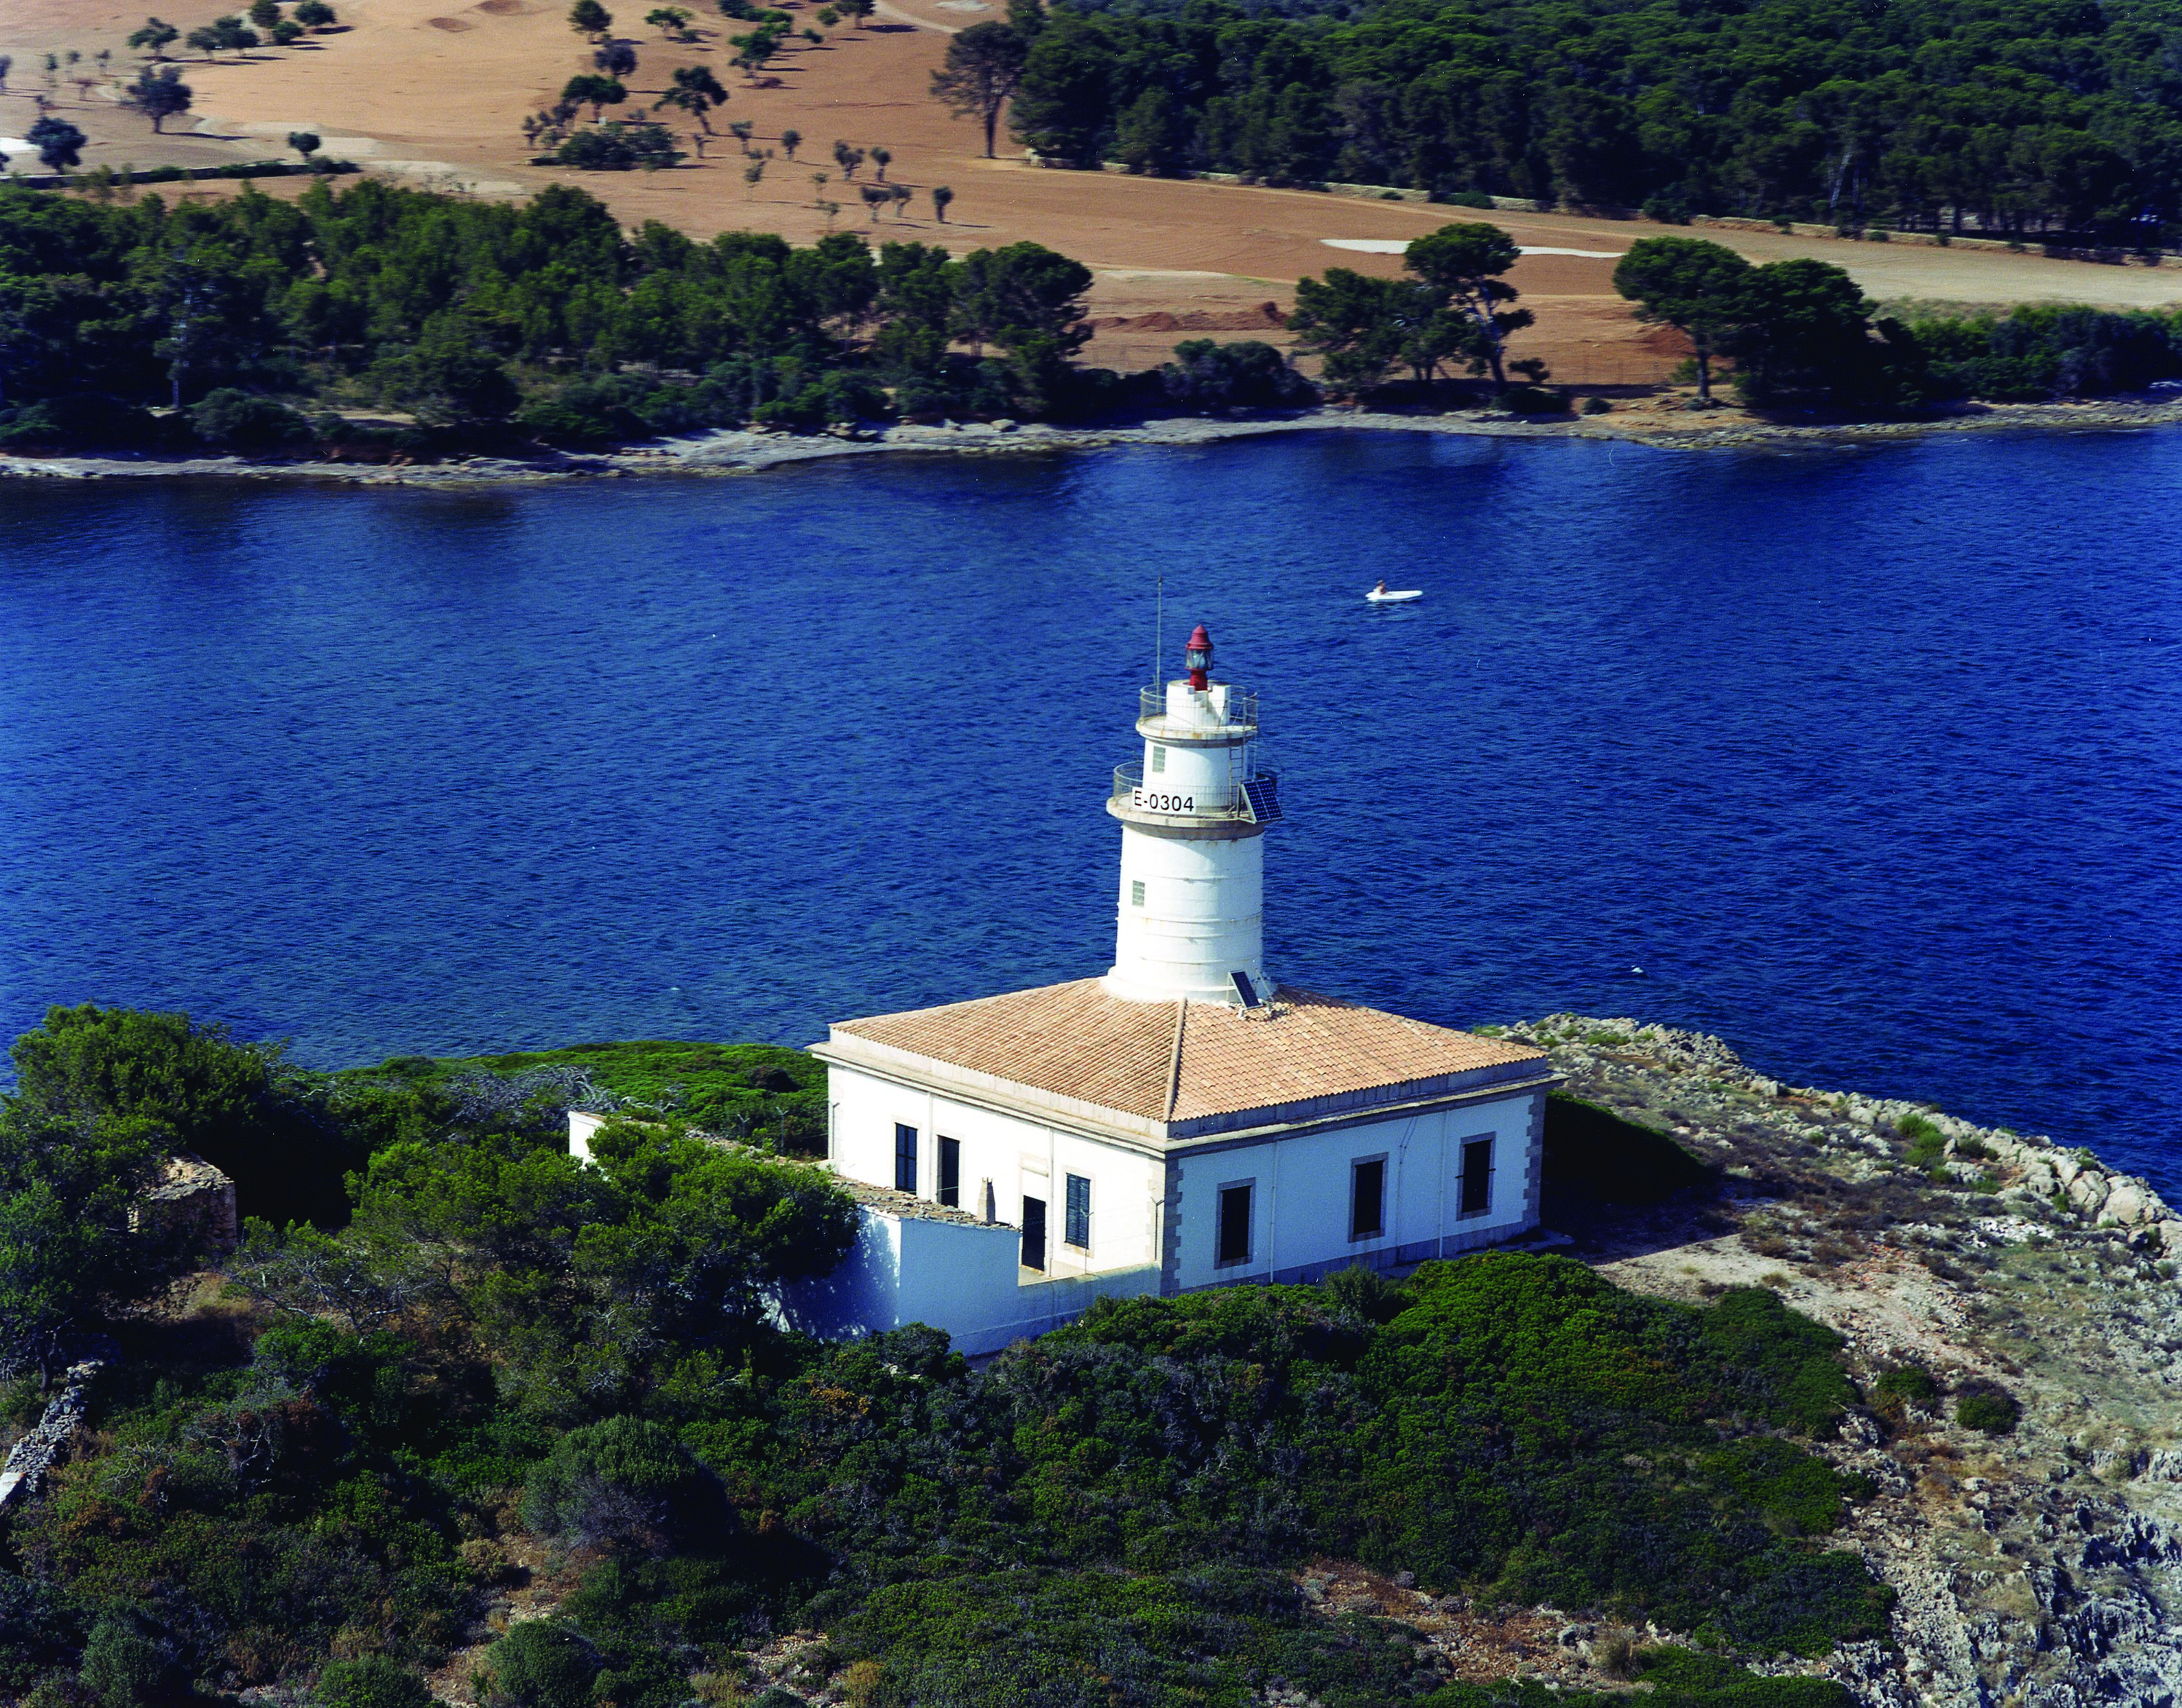 The APB puts out to tender the adaptation work on the Portocolom, Alcanada and Capdepera lighthouses